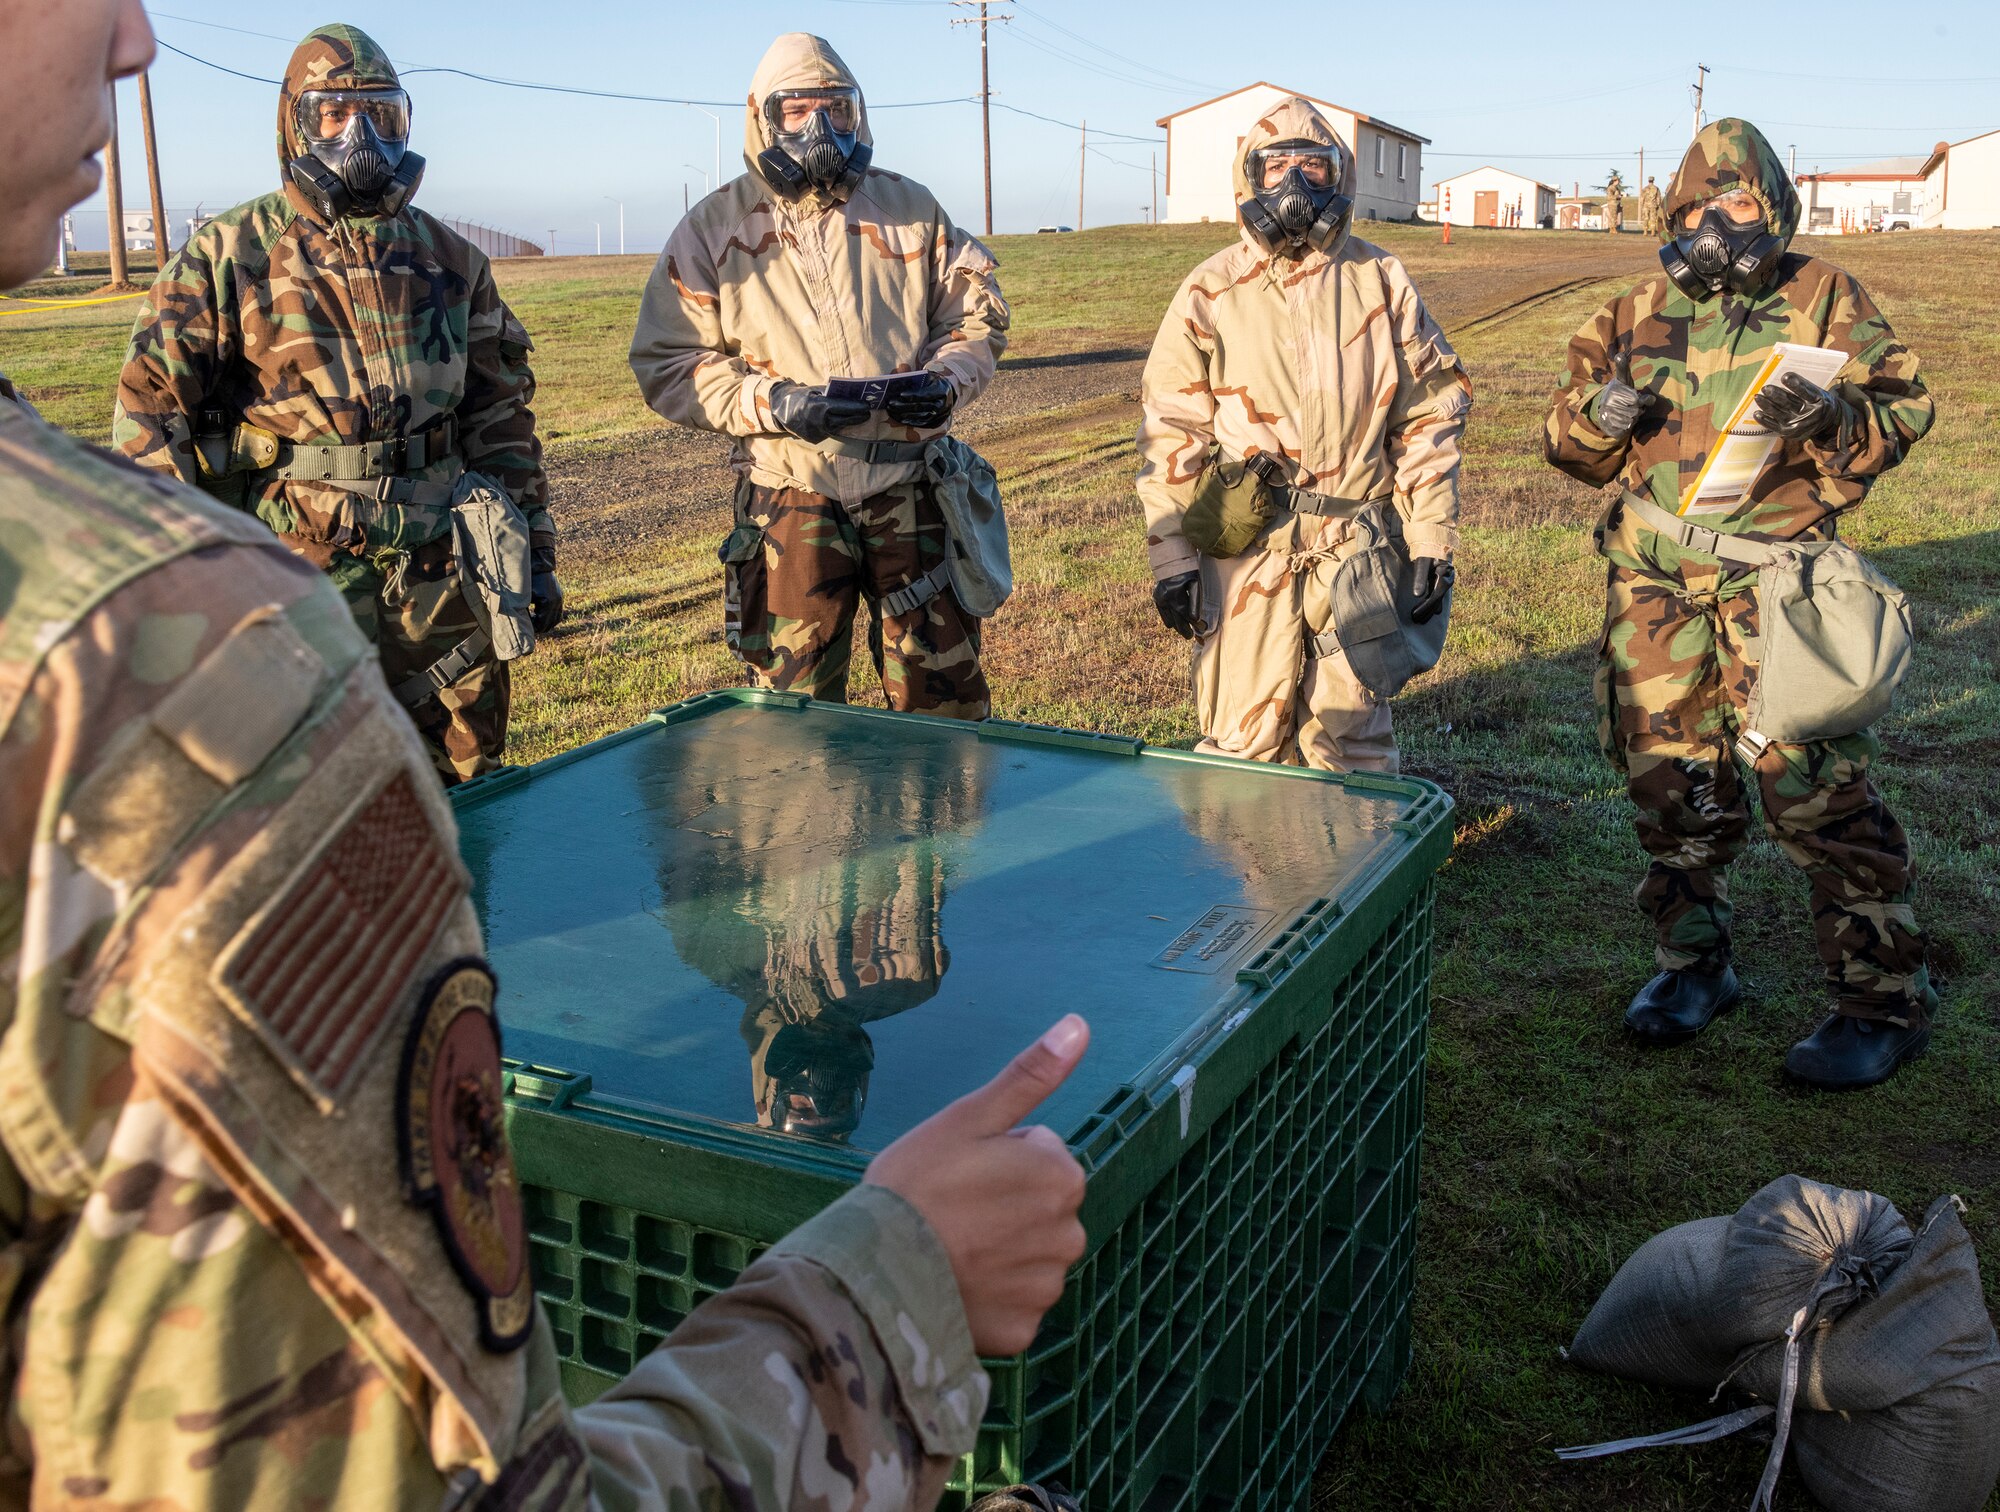 U. S. Air Force Airmen learn how to protect an “asset” during a chemical, biological, radiological and nuclear defense survival skills training course on Oct. 28 2021, at Travis Air Force Base, California. CBRN defenses are protective measures taken in situations in which chemical, biological, radiological or nuclear warfare hazards may be present. CBRN defense consists of CBRN passive protection, contamination avoidance and CBRN mitigation. (U.S. Air Force photo by Heide Couch)